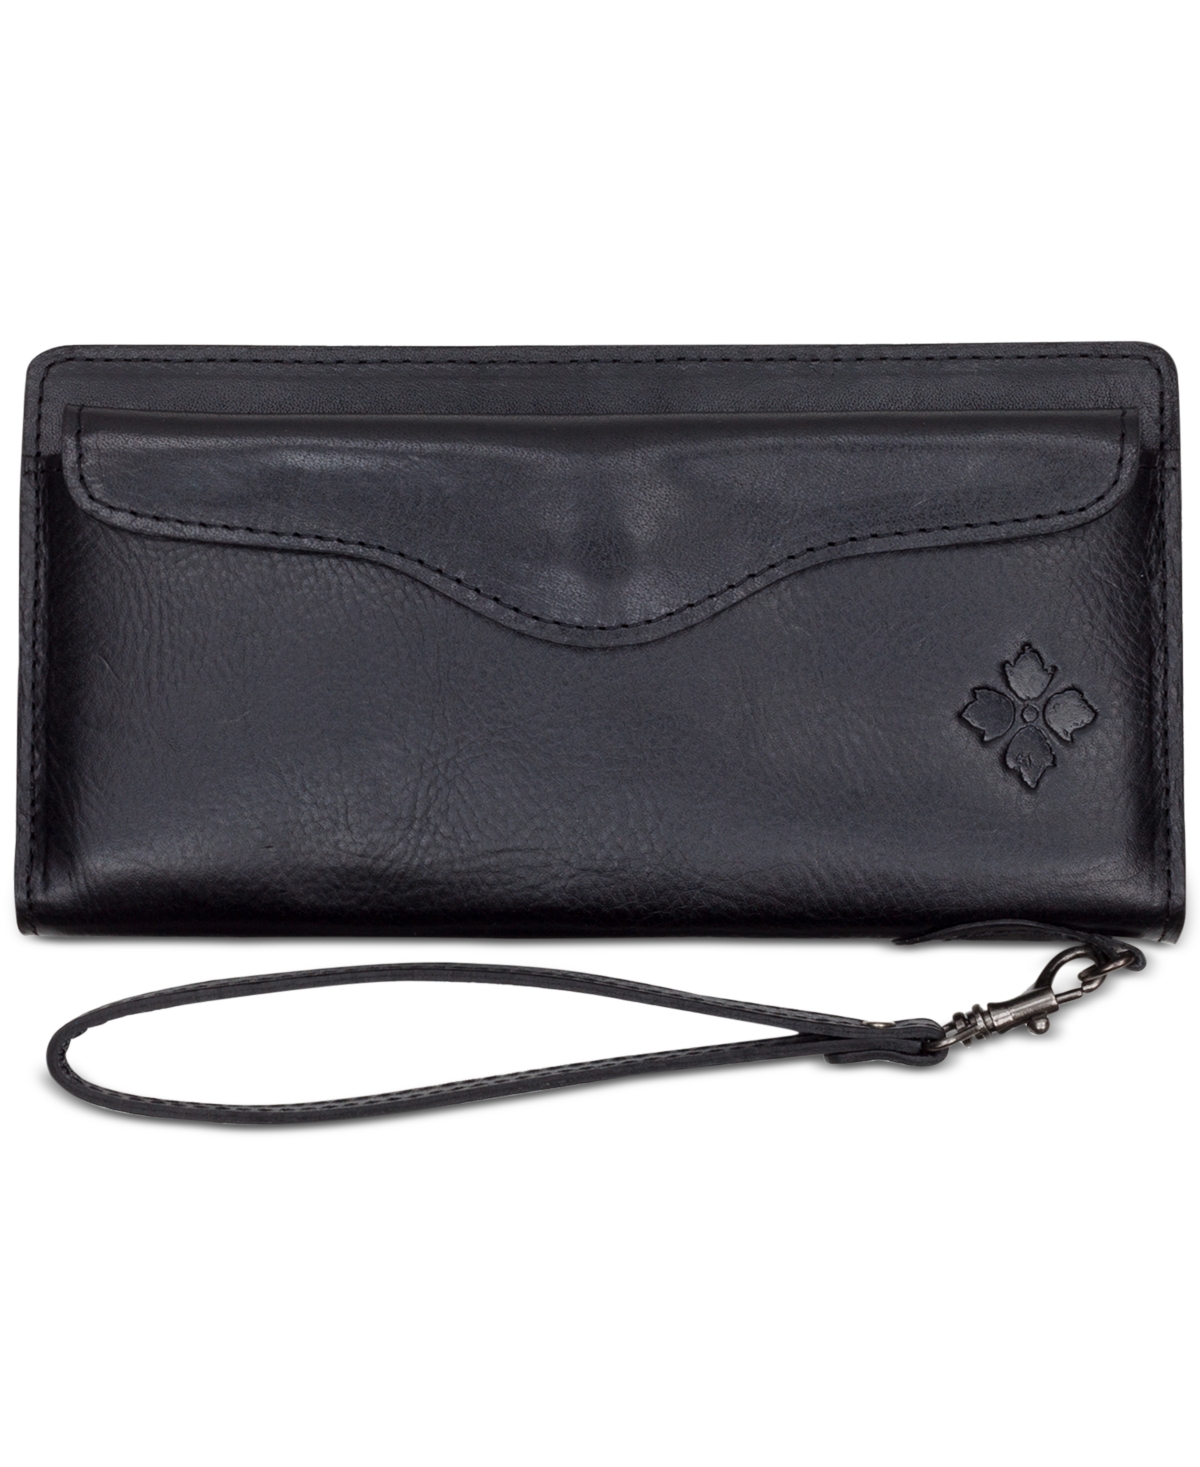 Valentia Smooth Leather Wallet - Black/Silver